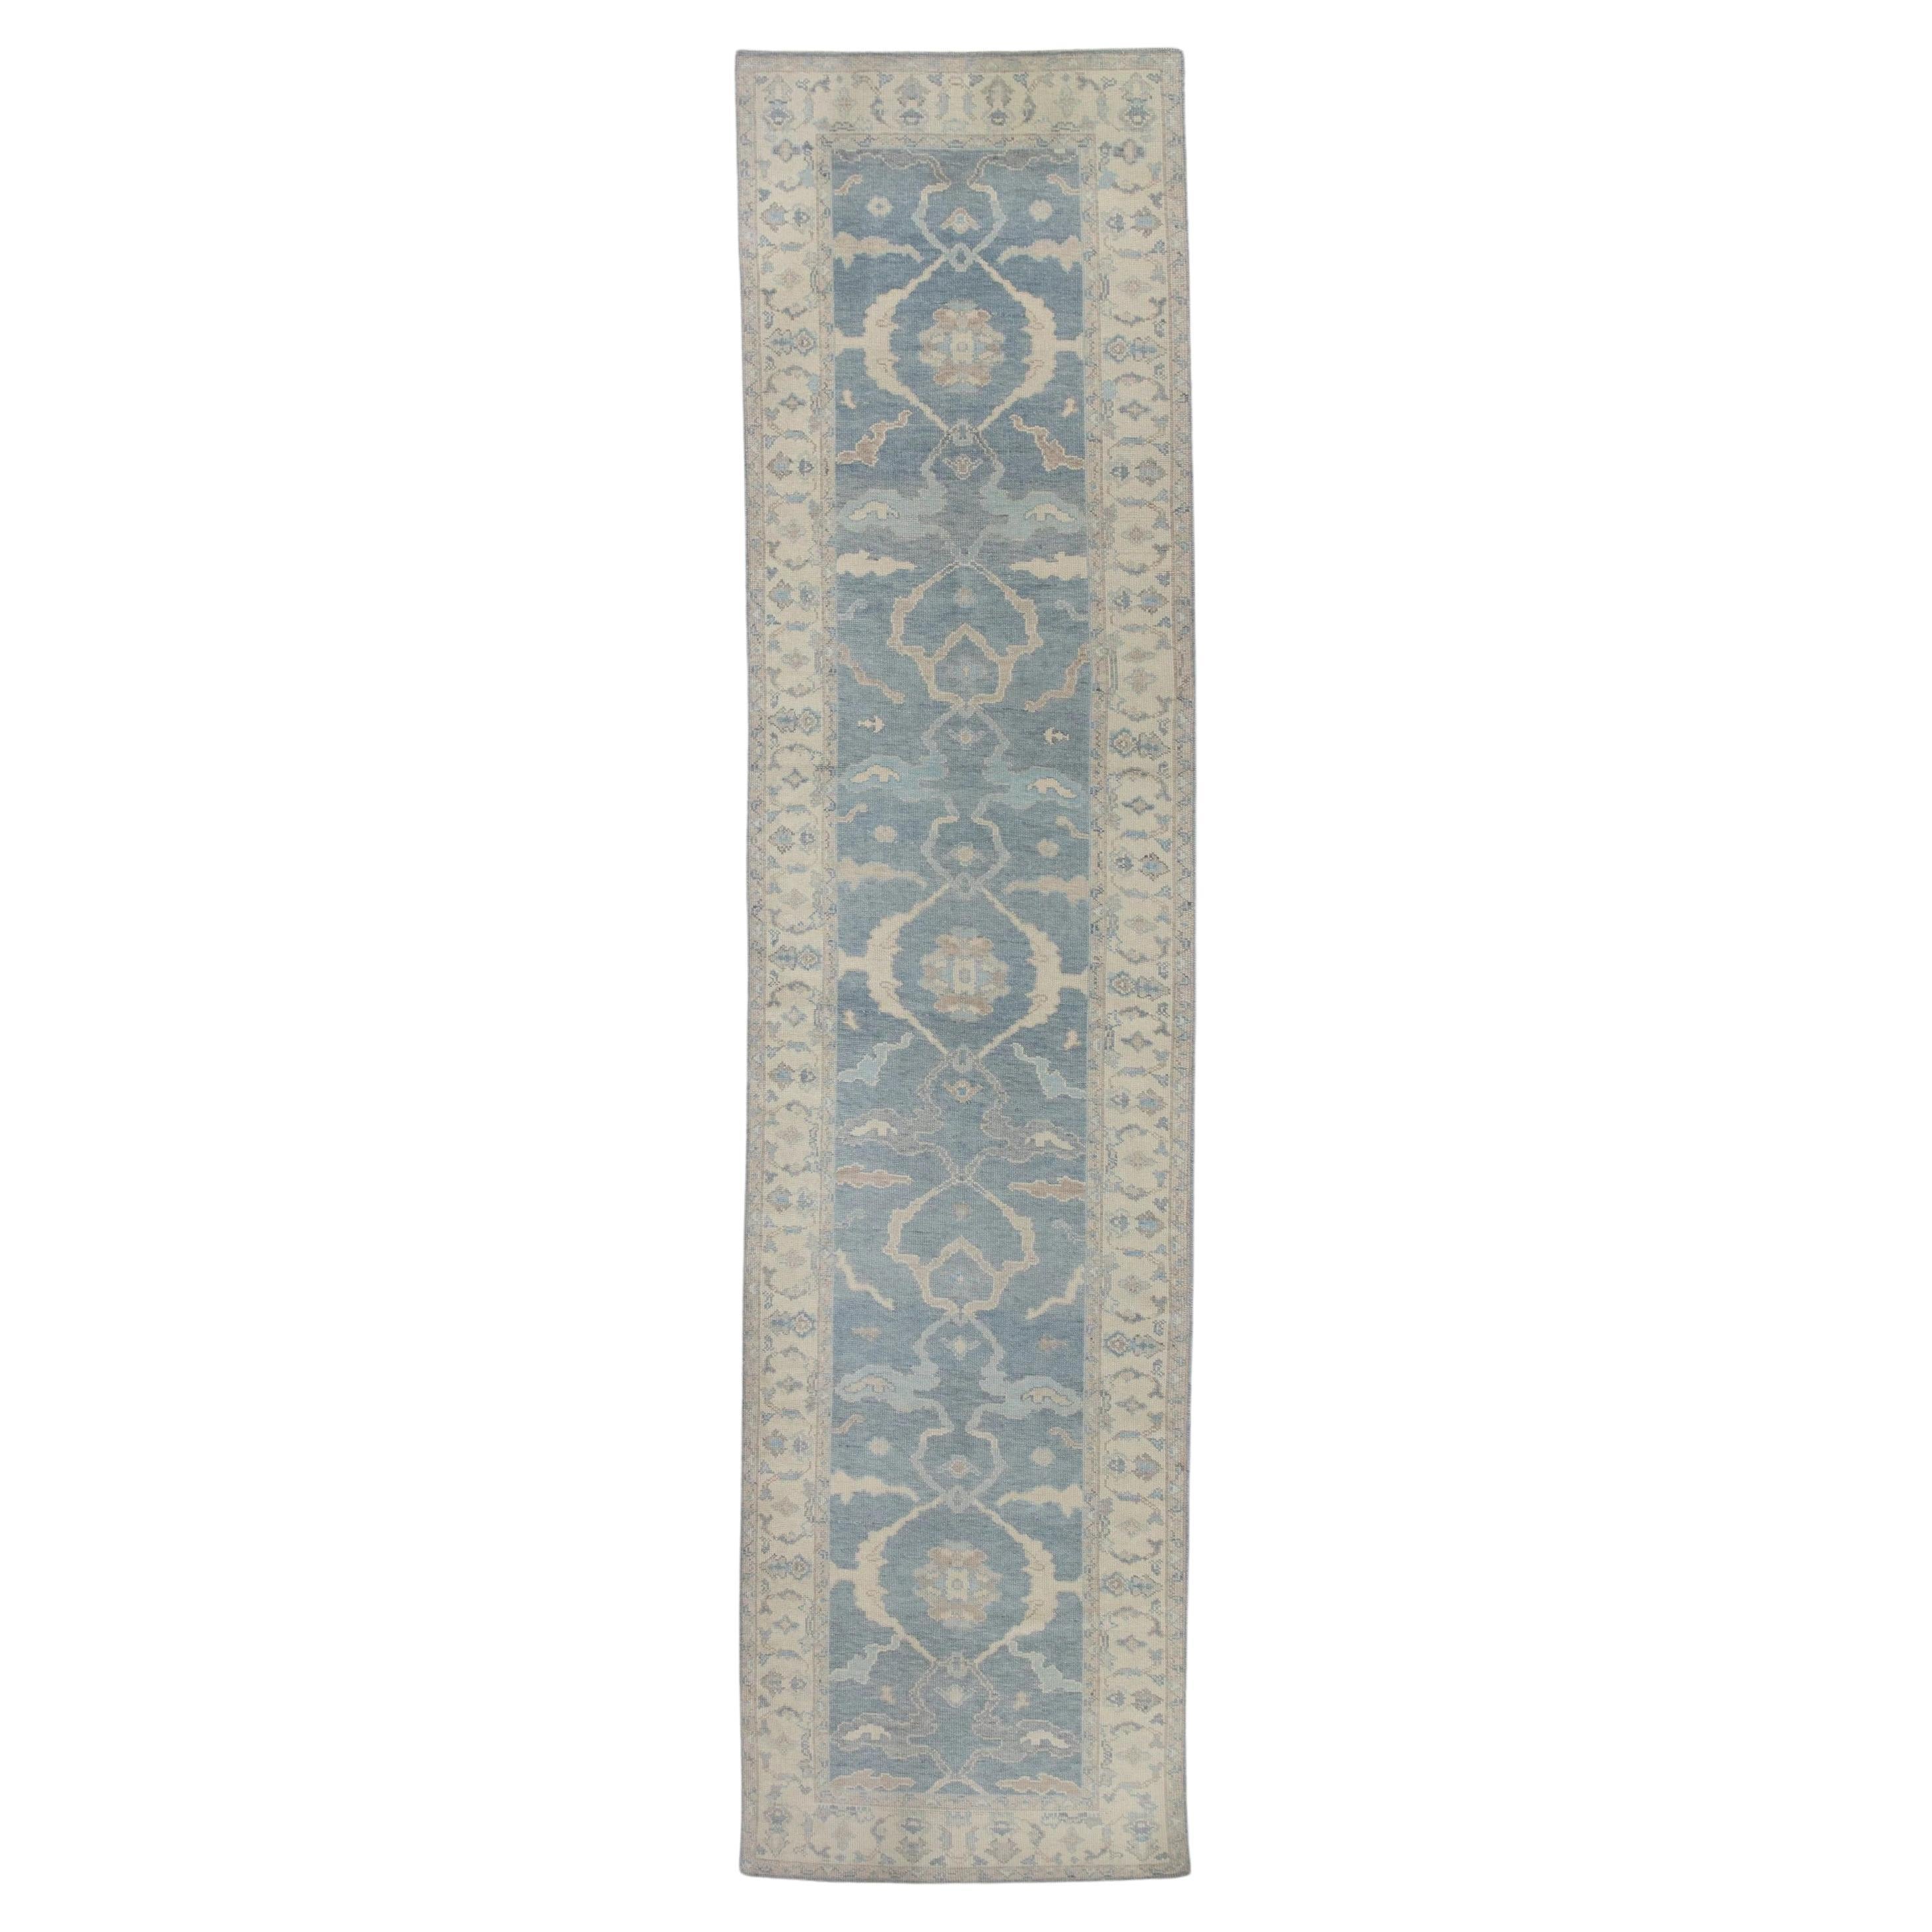 Blue Floral Pattern Handwoven Wool Turkish Oushak Runner 3'10" X 16'1" For Sale